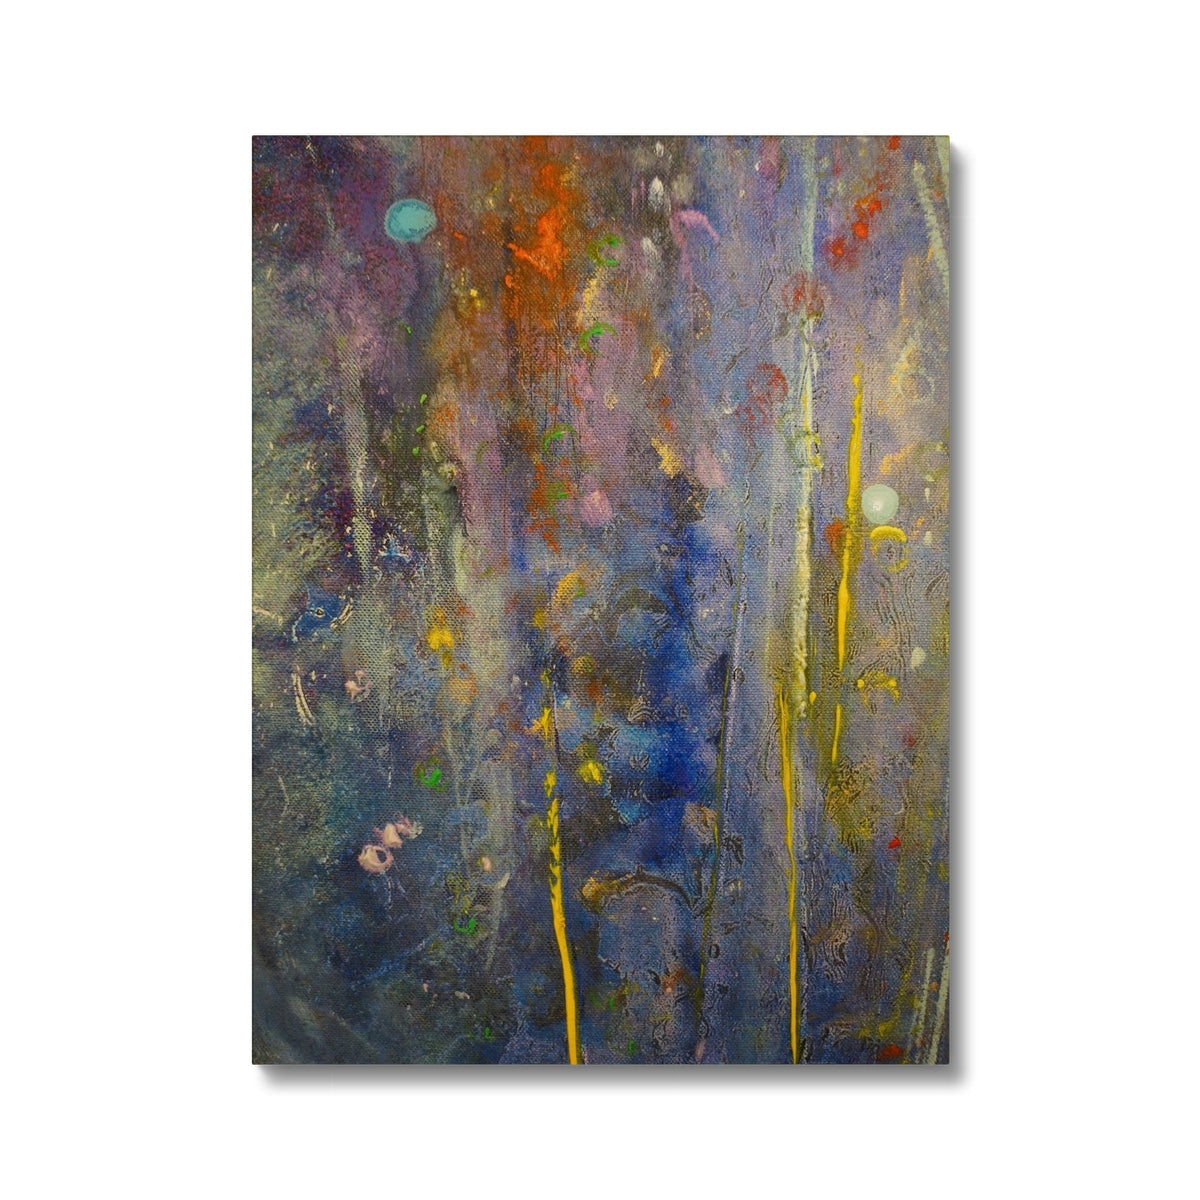 Cairngorms Waterfall Abstract Painting | Canvas From Scotland-Contemporary Stretched Canvas Prints-Abstract & Impressionistic Art Gallery-18"x24"-Paintings, Prints, Homeware, Art Gifts From Scotland By Scottish Artist Kevin Hunter